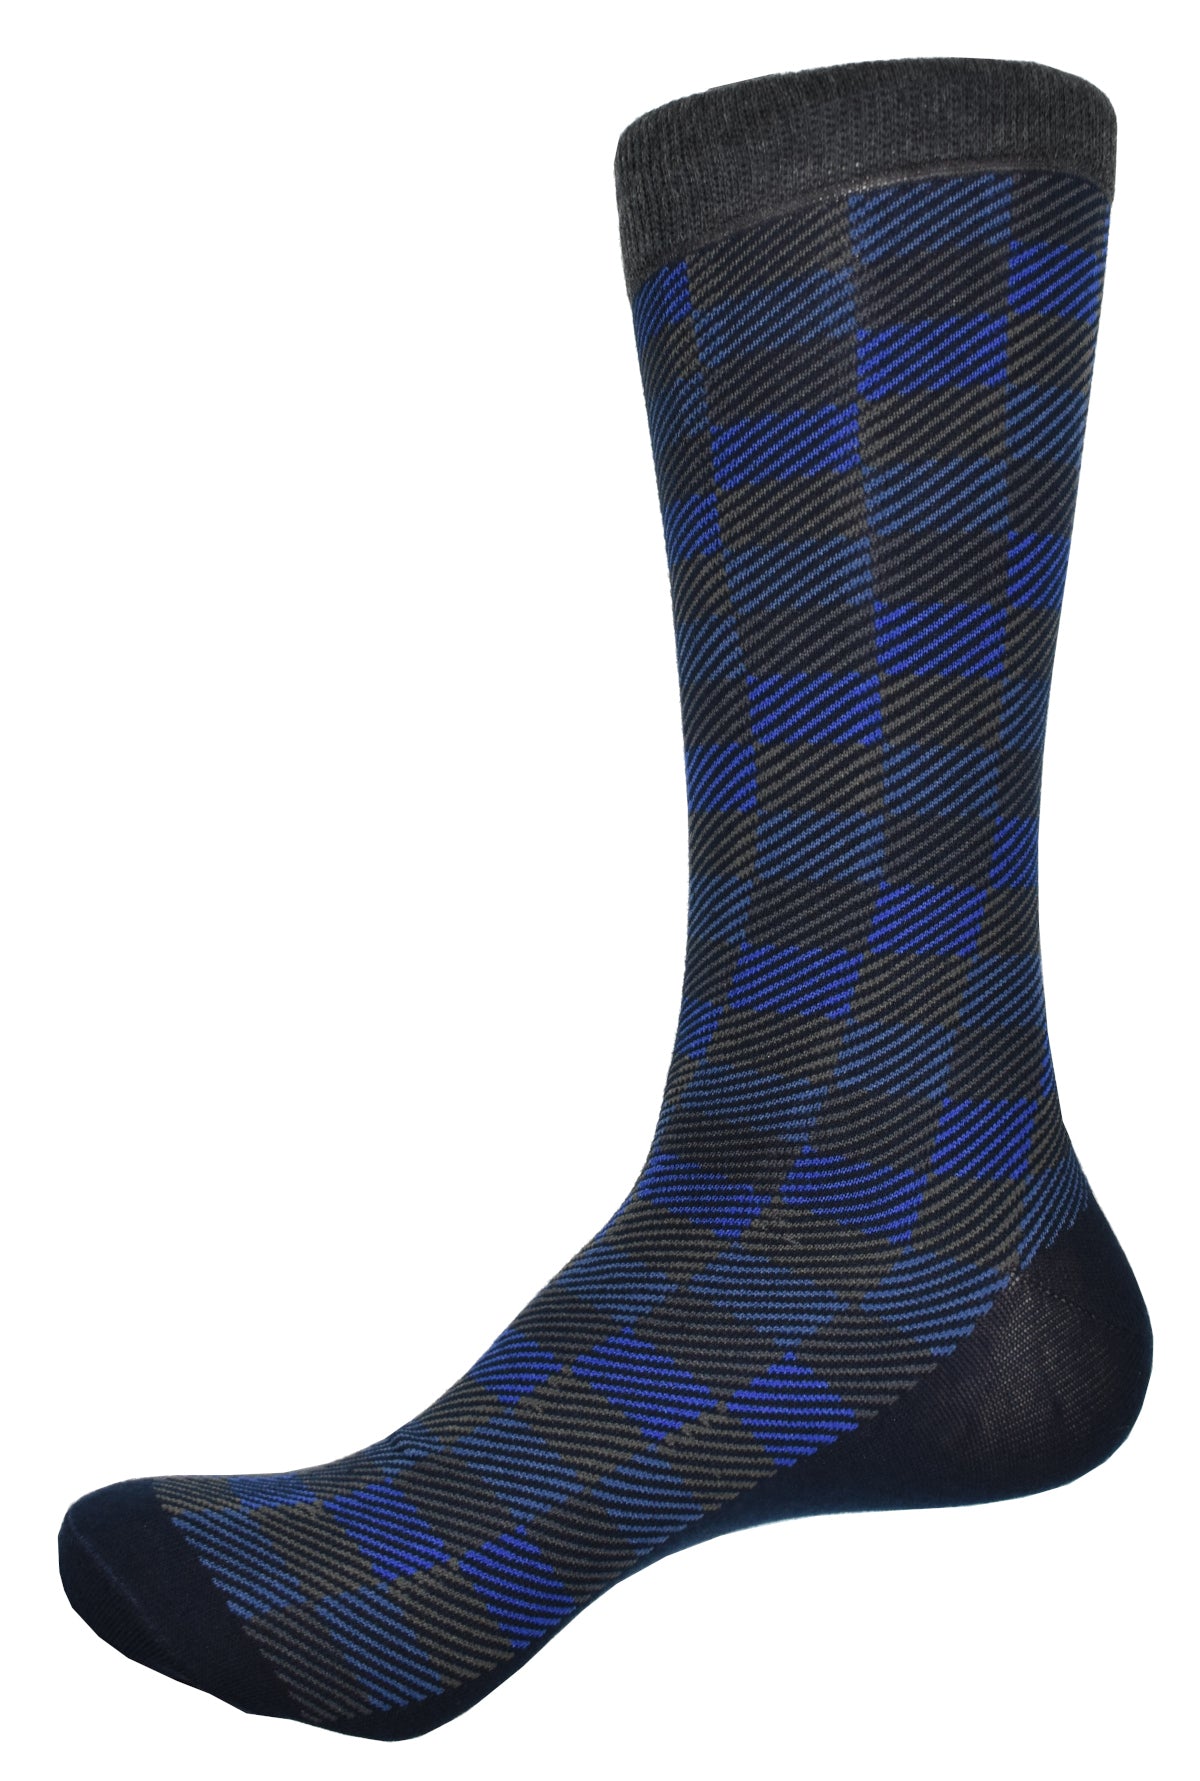 Experience ultimate comfort with ZJ315 Royal Rectangles Socks. Crafted from soft mercerized cotton in a calf high design, these luxury socks come in a elegant royal, navy with a touch of chocolate color palette for an elevated look. Marcello Socks